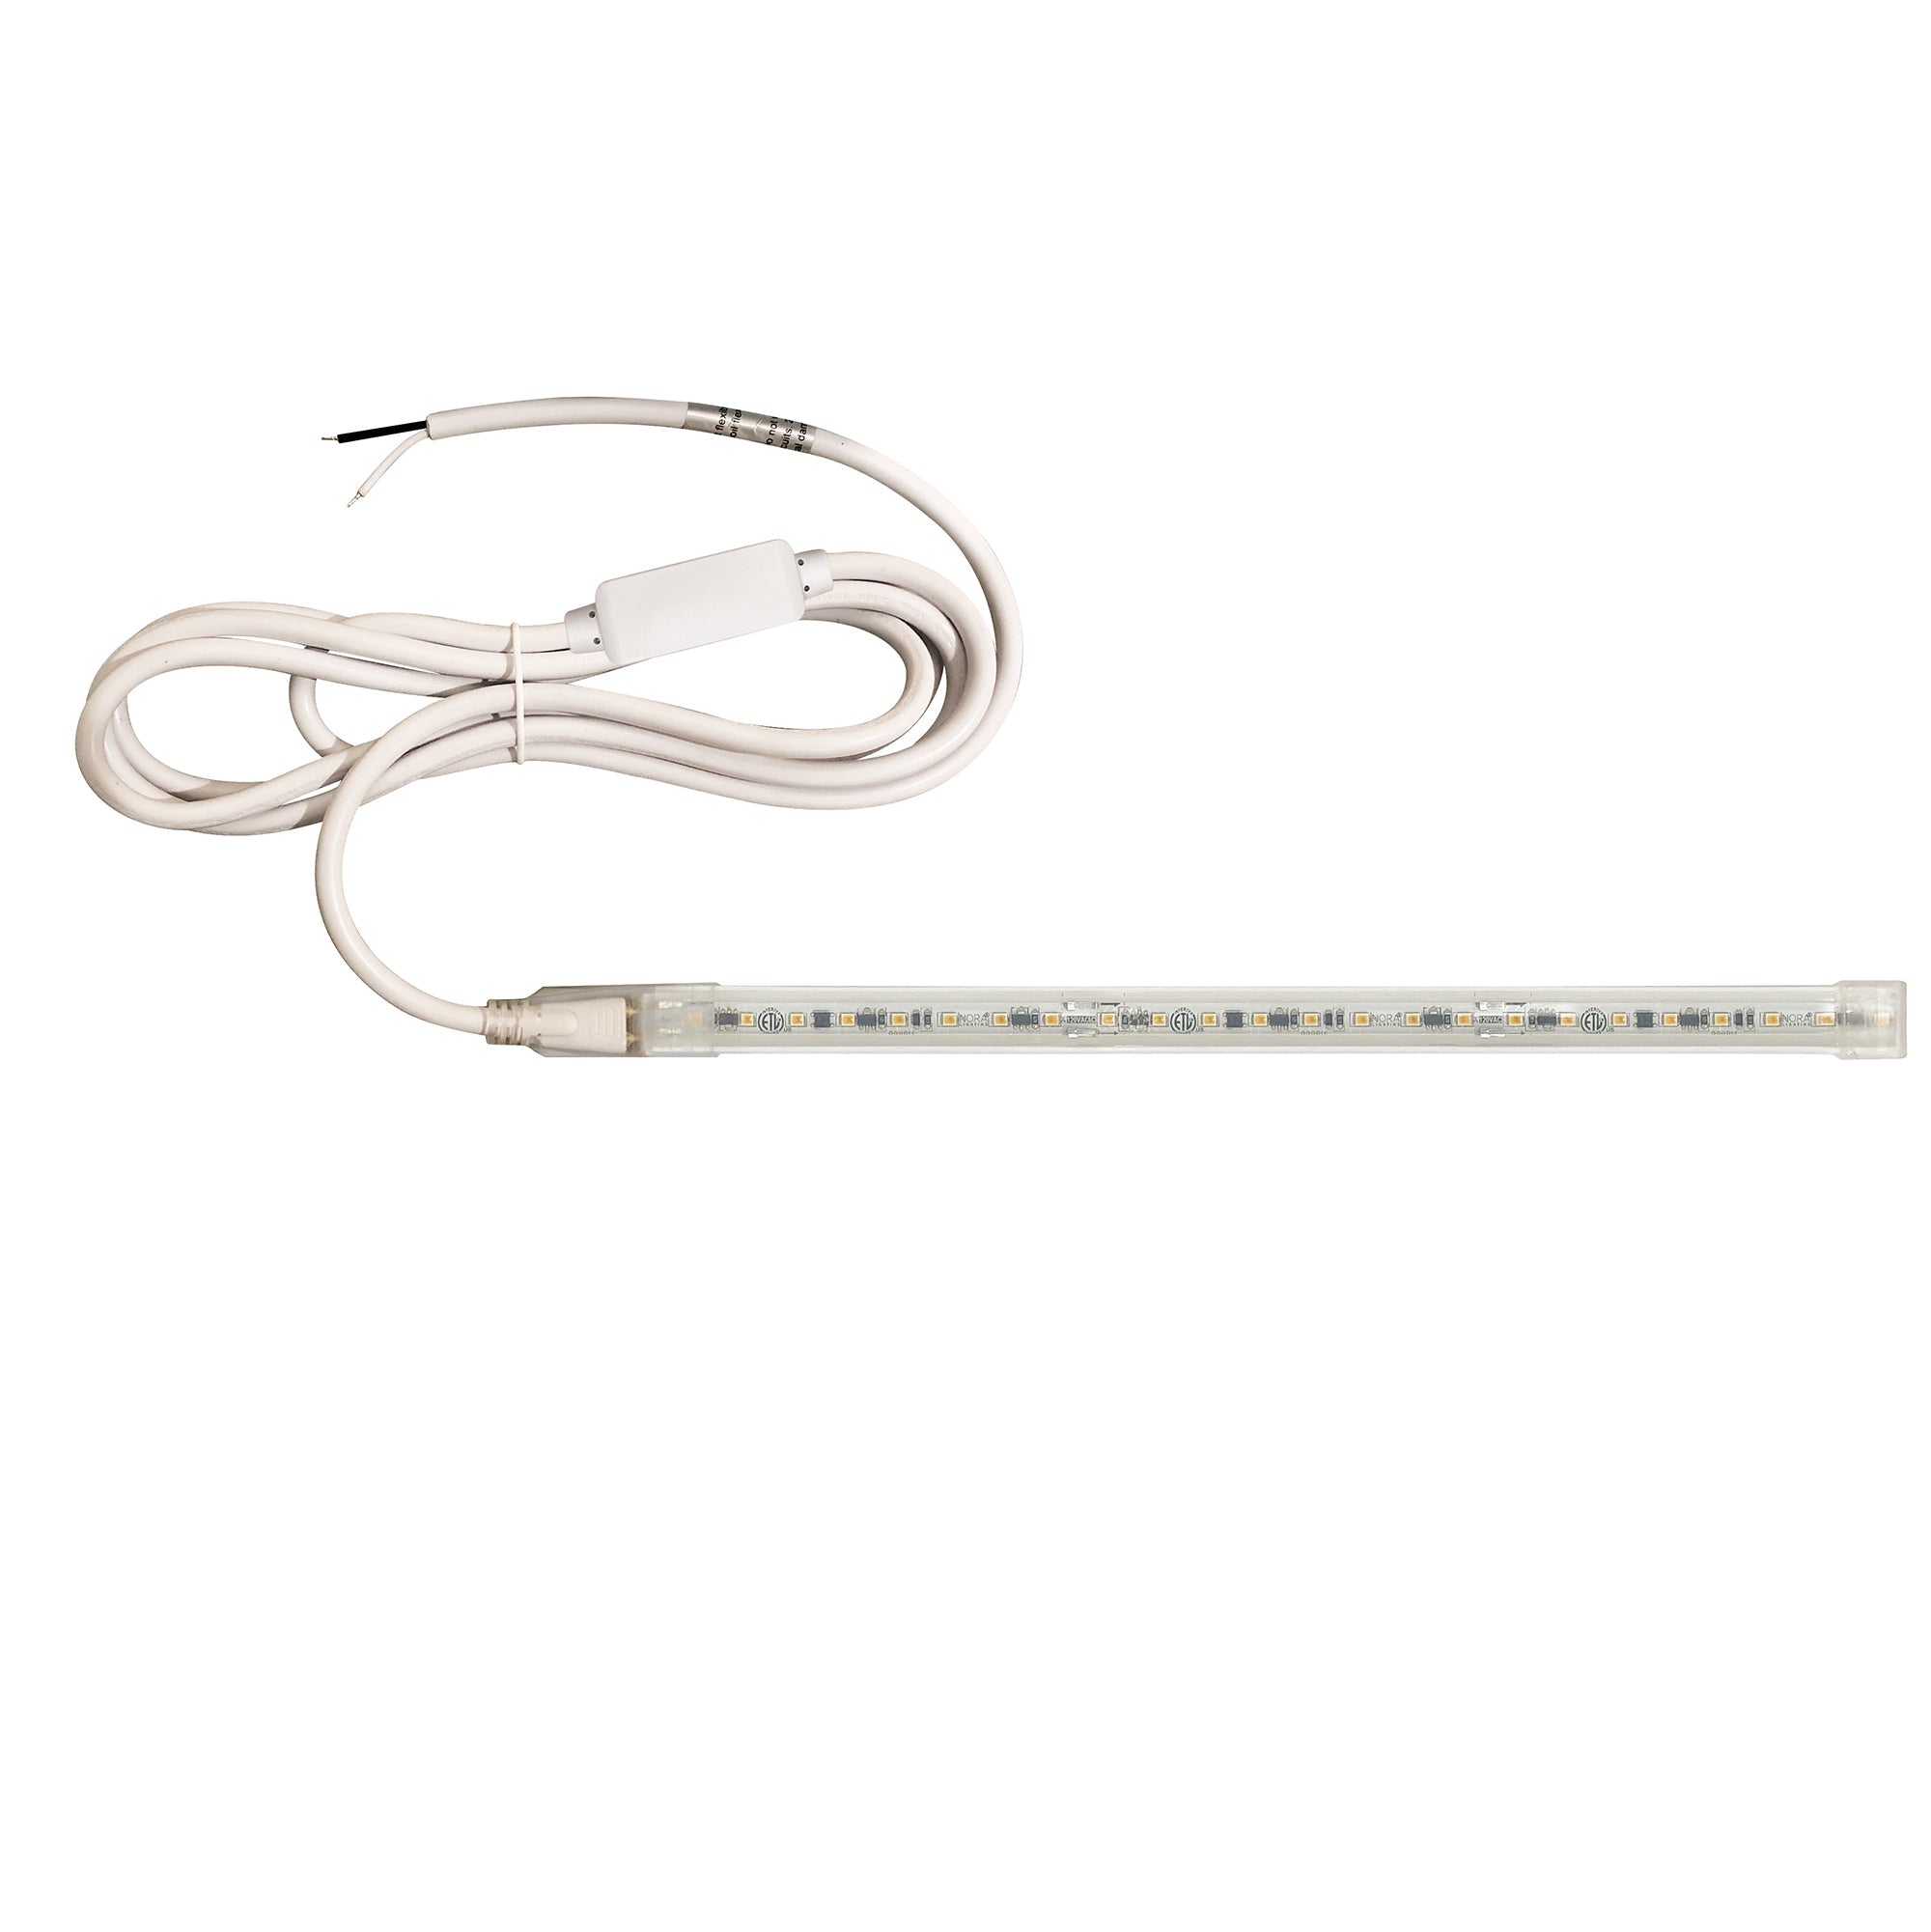 Nora Lighting NUTP13-W9-12-930/HWSP - Accent / Undercabinet - Custom Cut 9-ft 120V Continuous LED Tape Light, 330lm / 3.6W per foot, 3000K, w/ Mounting Clips and 8' Hardwired Power Cord w/ Surge Protector